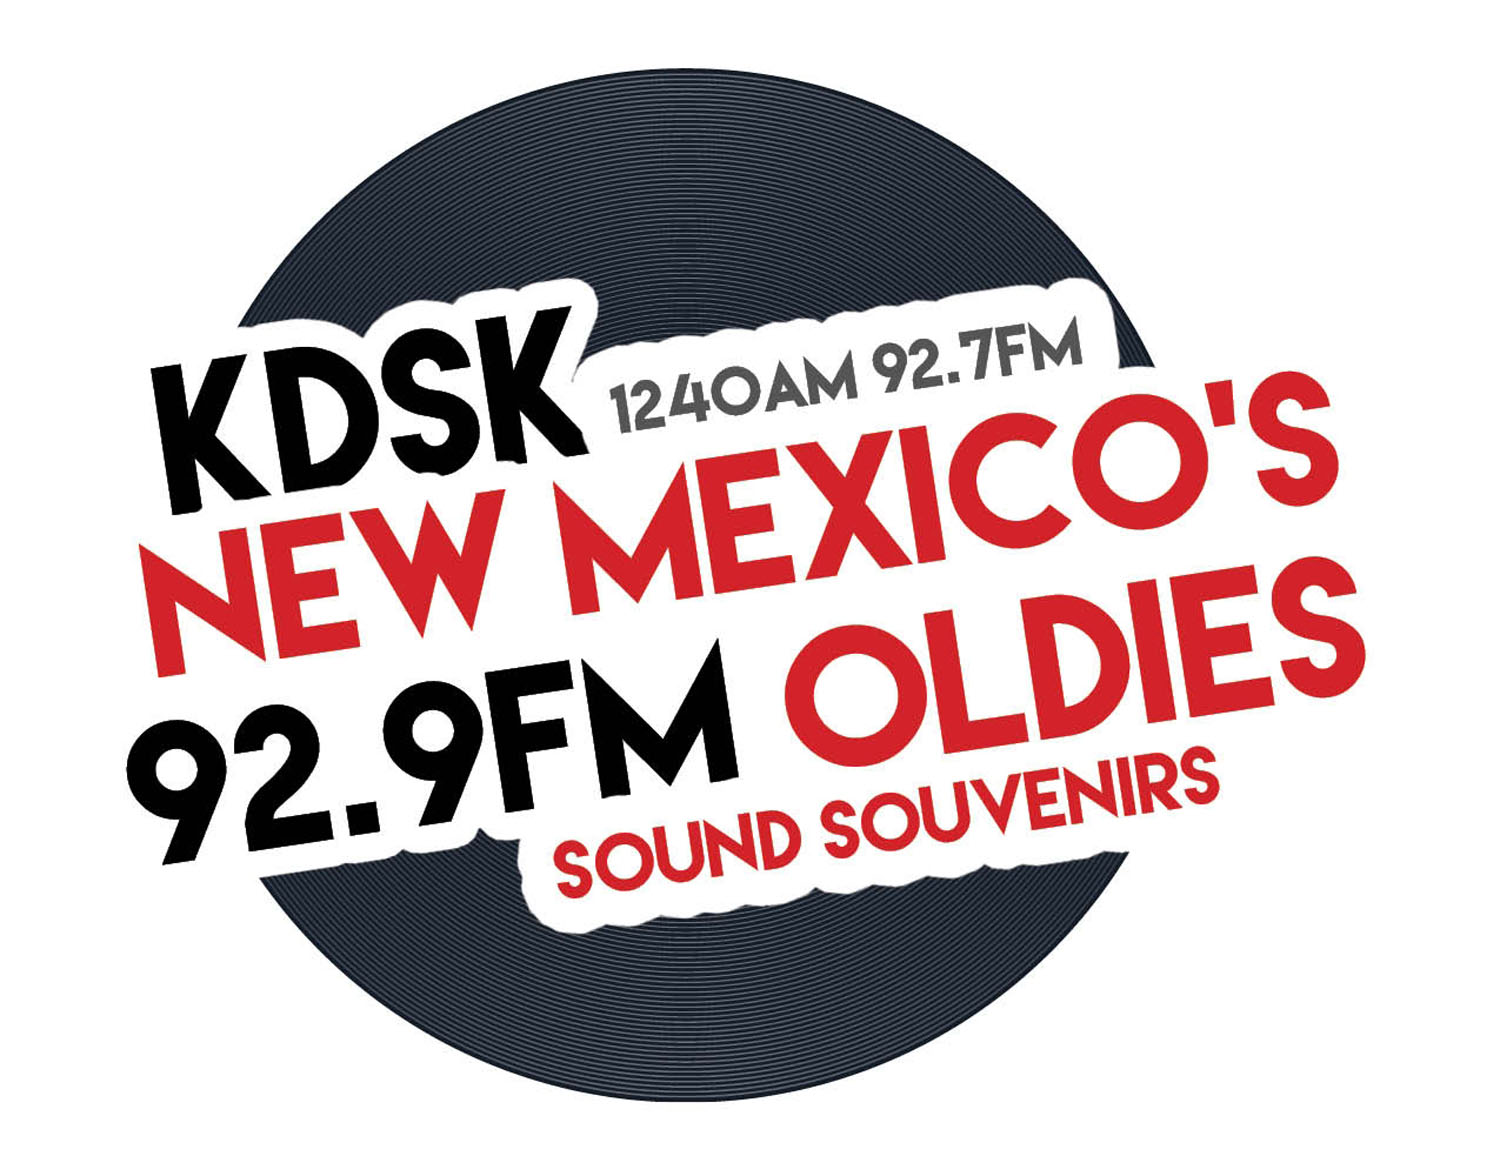 KDSK - Oldies Radio for New Mexico and Beyond!